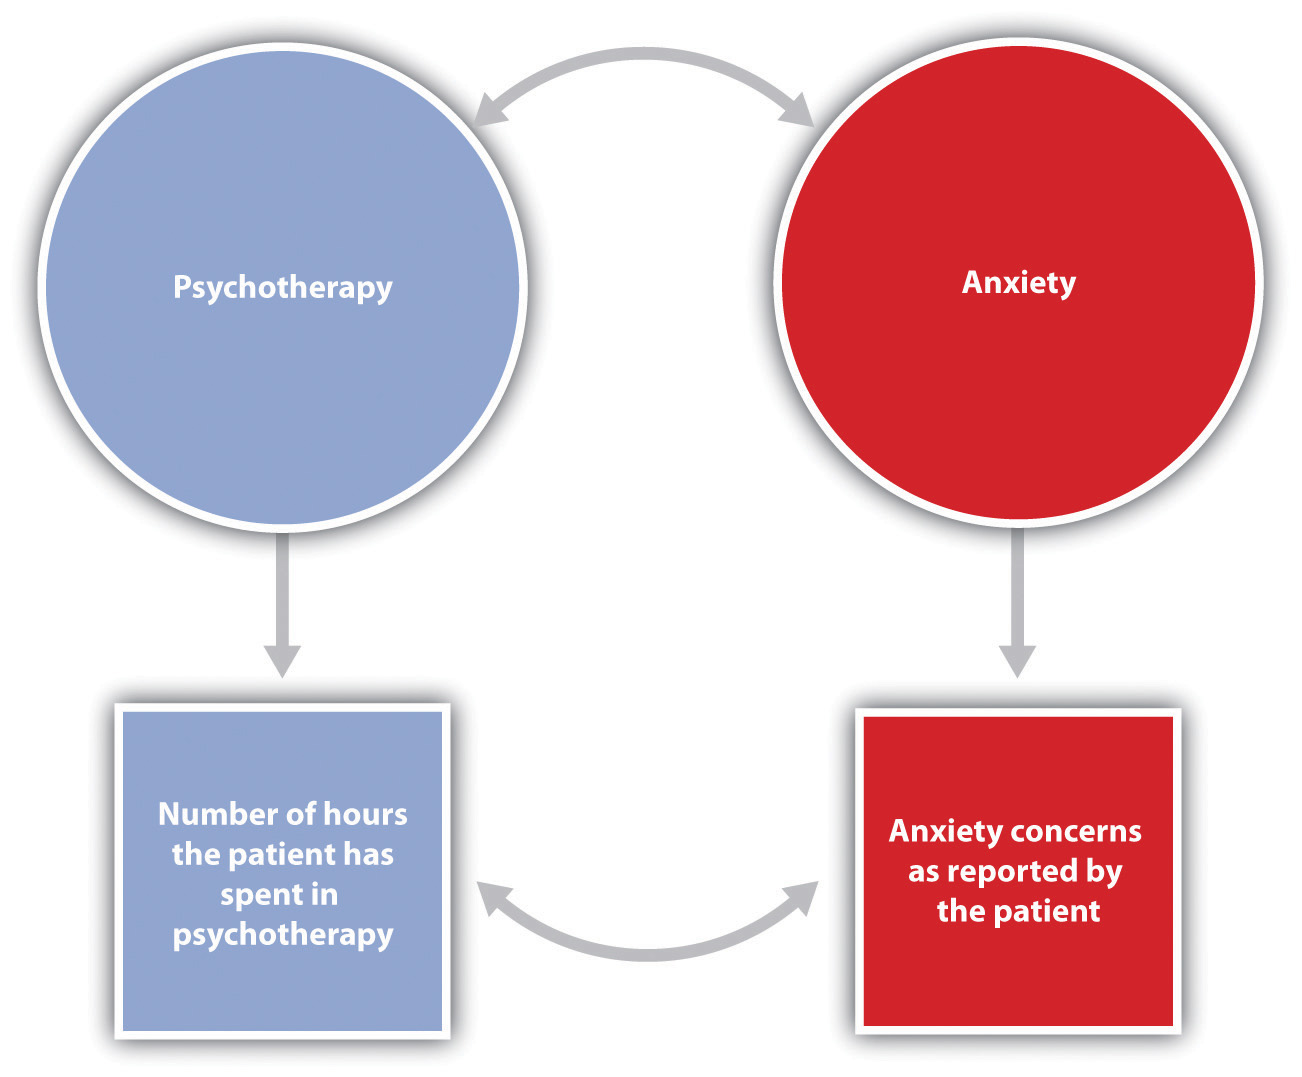 In this research hypothesis, the conceptual variable of attending psychotherapy is operationalized using the number of hours of psychotherapy the client has completed, and the conceptual variable of anxiety is operationalized using self-reported levels of anxiety. The research hypothesis is that more psychotherapy will be related to less reported anxiety.